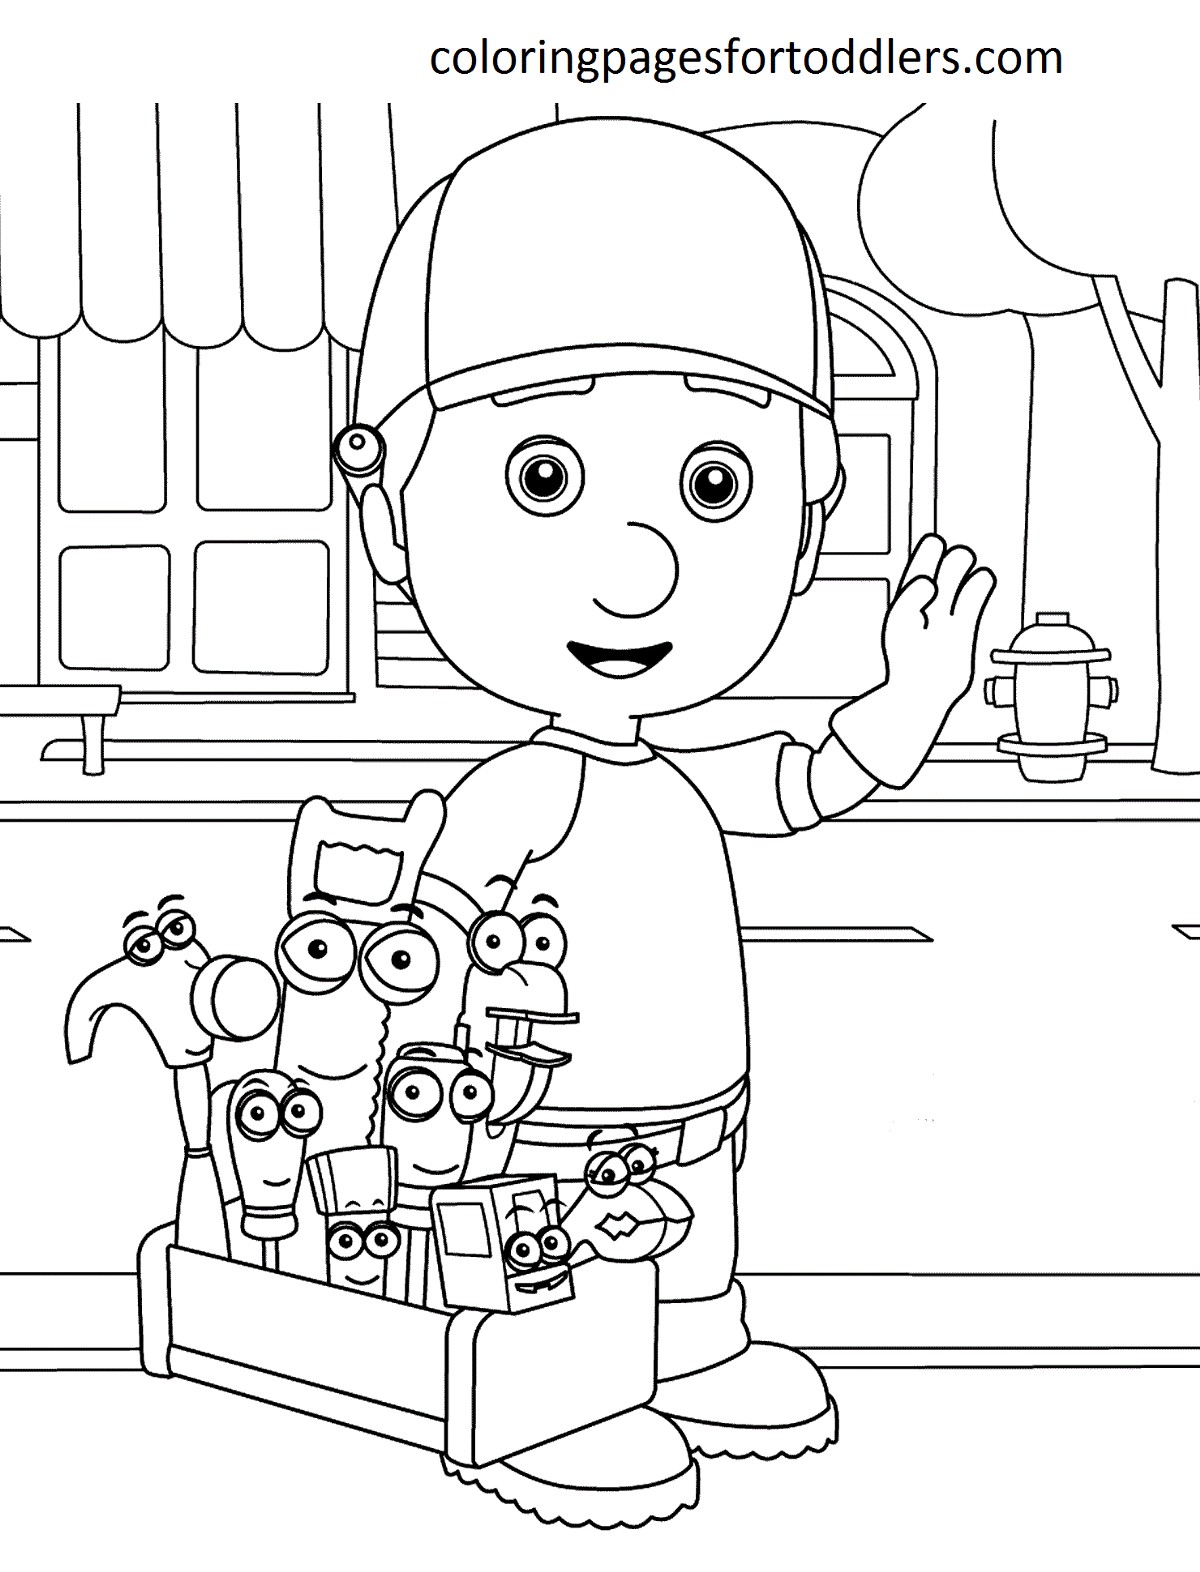 Handy Manny Coloring Pages. Coloringpagesfortodllers.com — These… | by  Indah Pertiwi | Medium